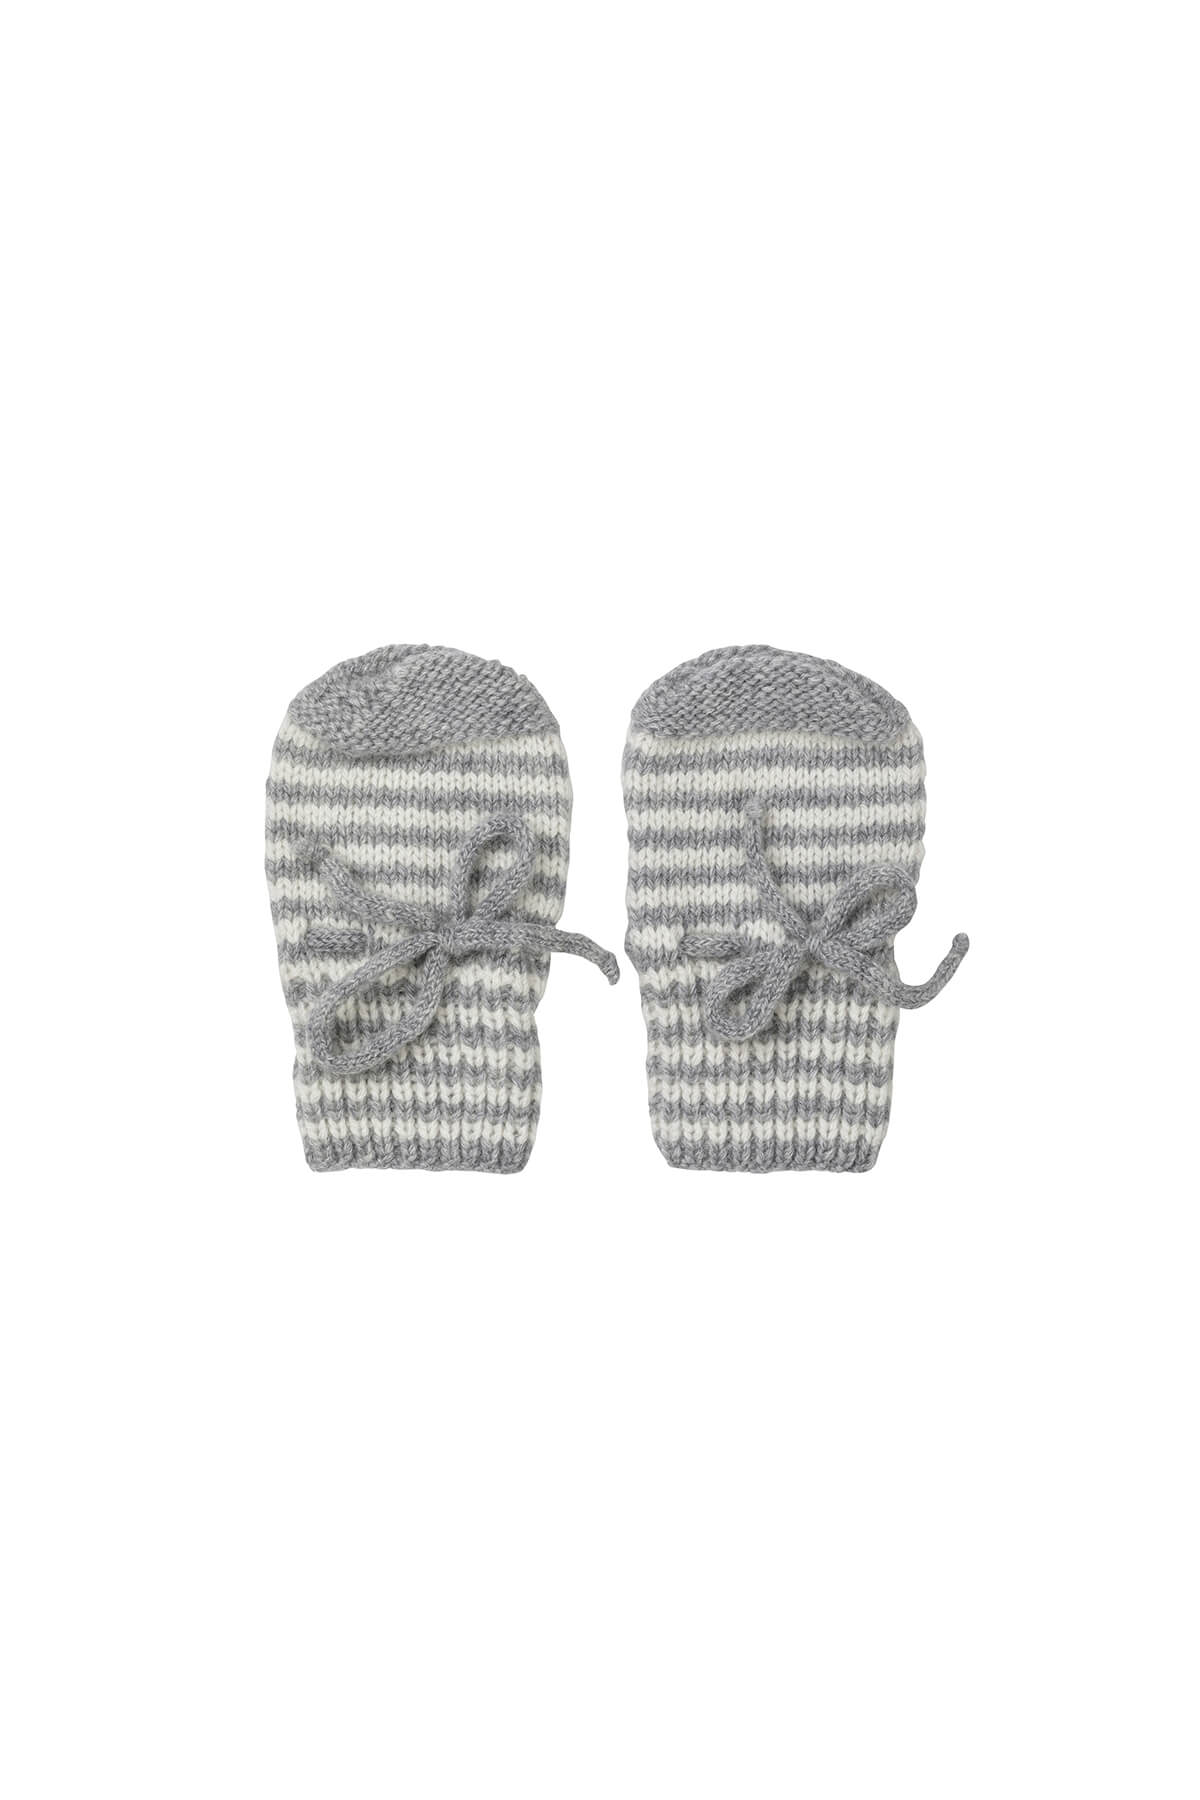 Johnstons of Elgin Hand Knitted Stripe Cashmere Baby Mittens in Silver & White on white background 746344243